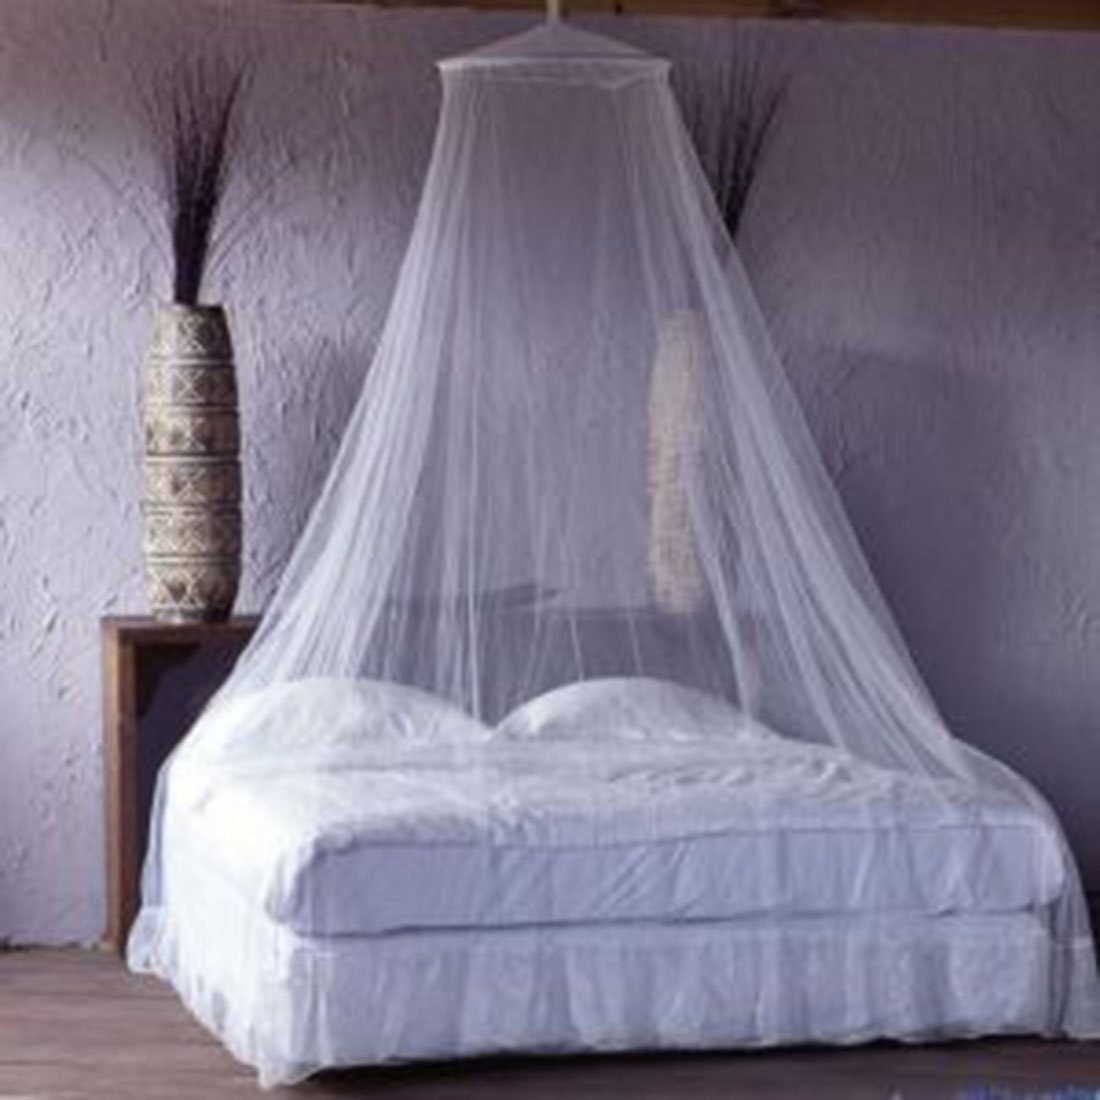 A white canopy hanging over a white bed 